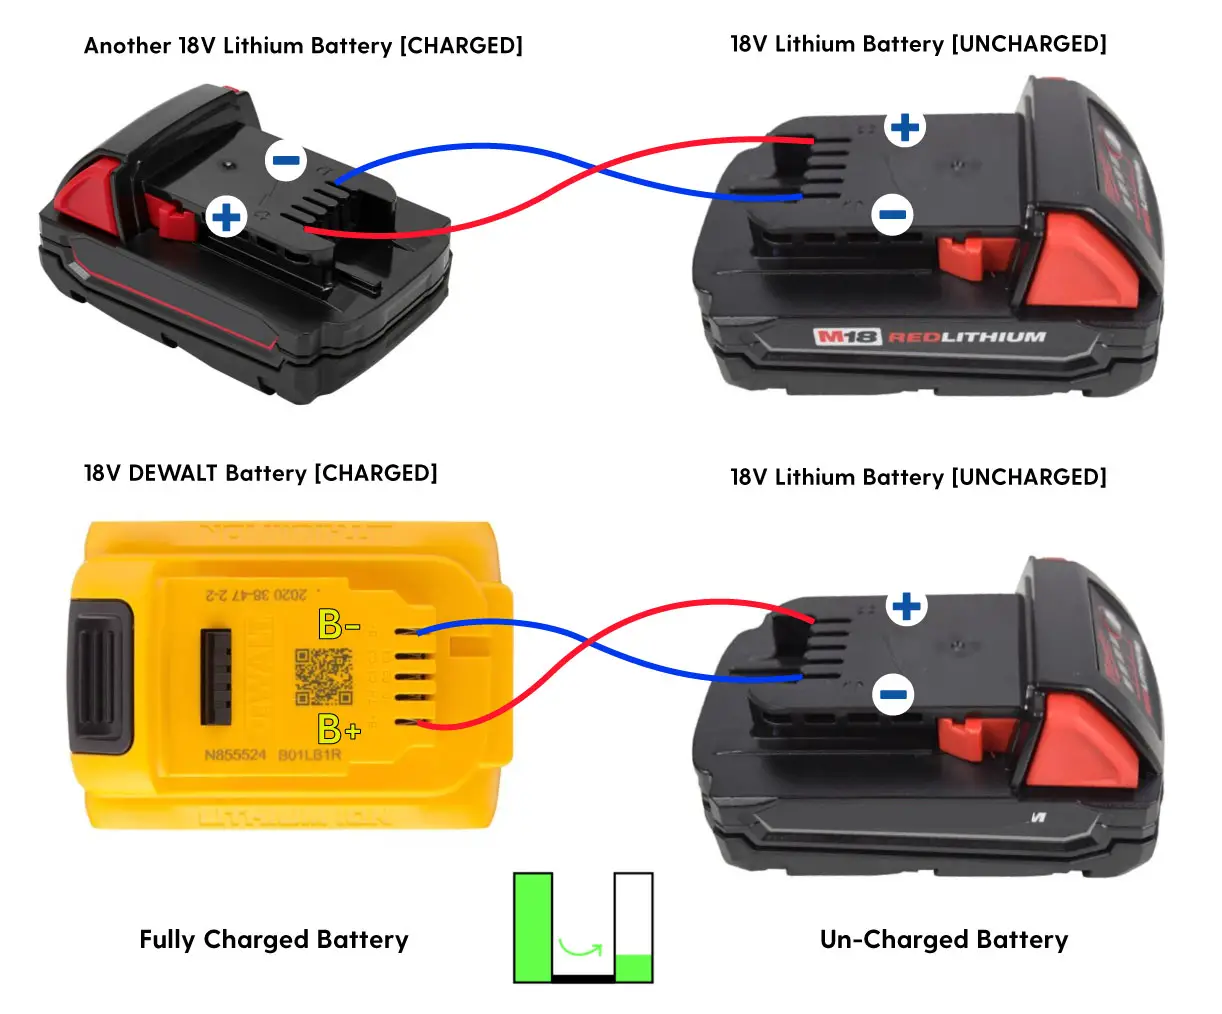 An image of an 18V Lithium battery charging another 18v Lithium batter